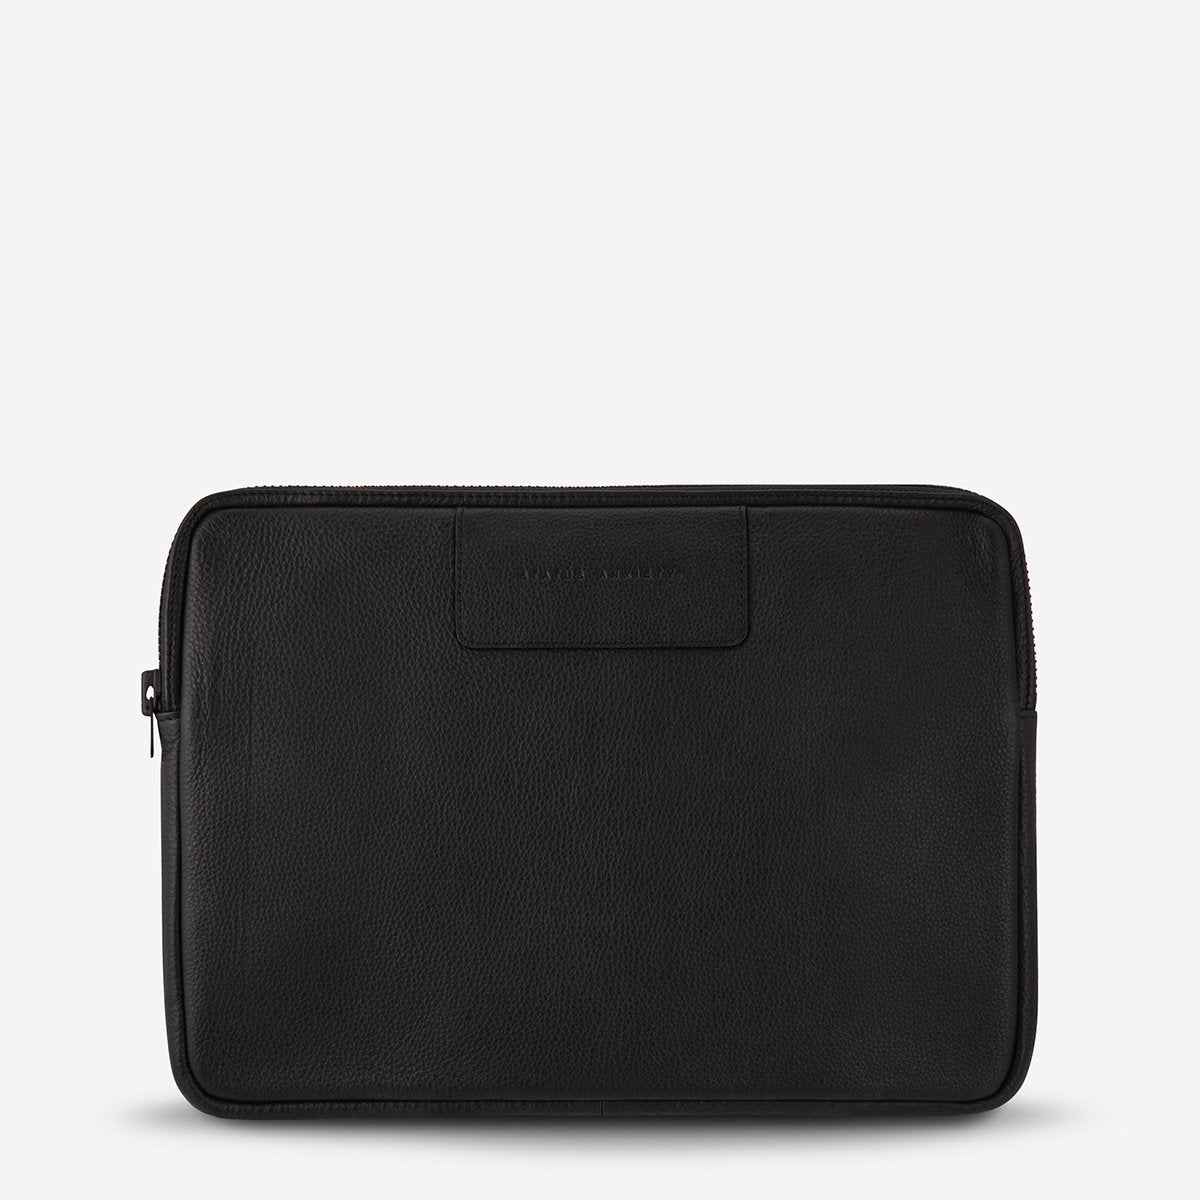 Status Anxiety Laptop Case - Before I Leave - Black